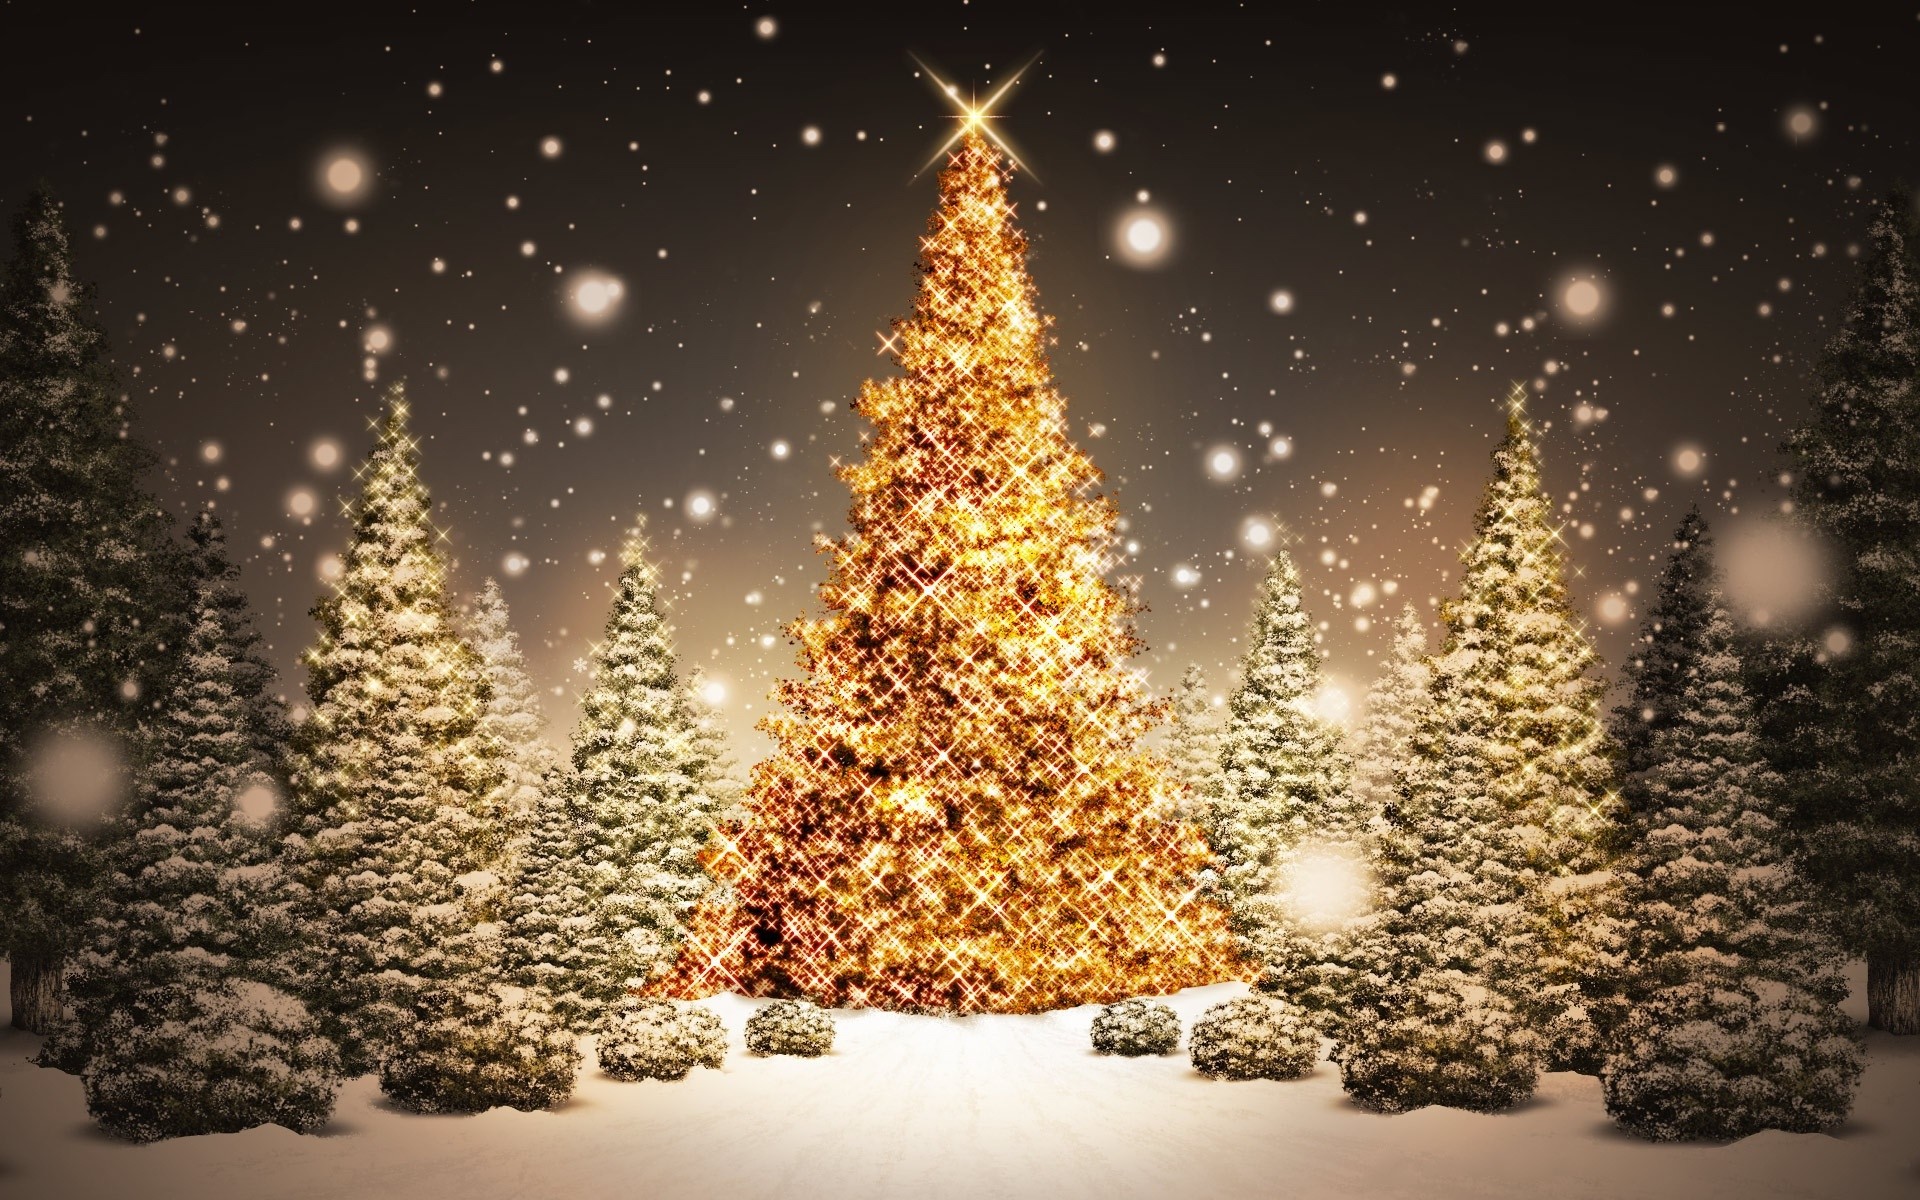 Christmas Snow Wallpapers Mobile - Merry Christmas Images With Trees - HD Wallpaper 